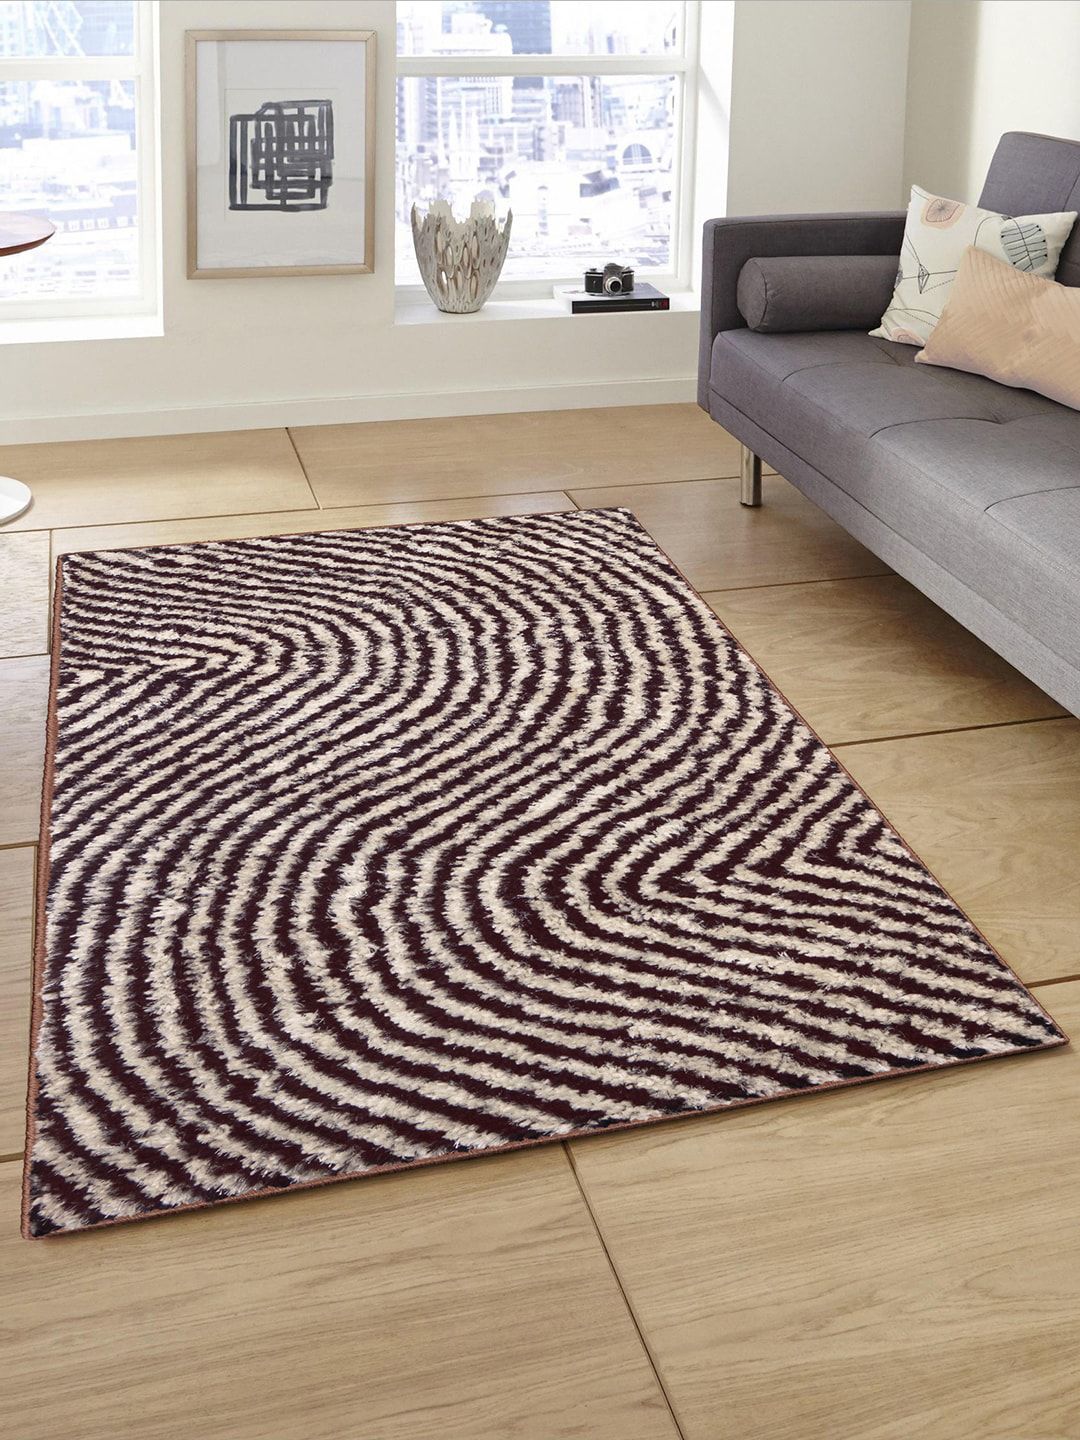 Story@home Beige & Brown Striped Anti-Skid Area Carpet Price in India